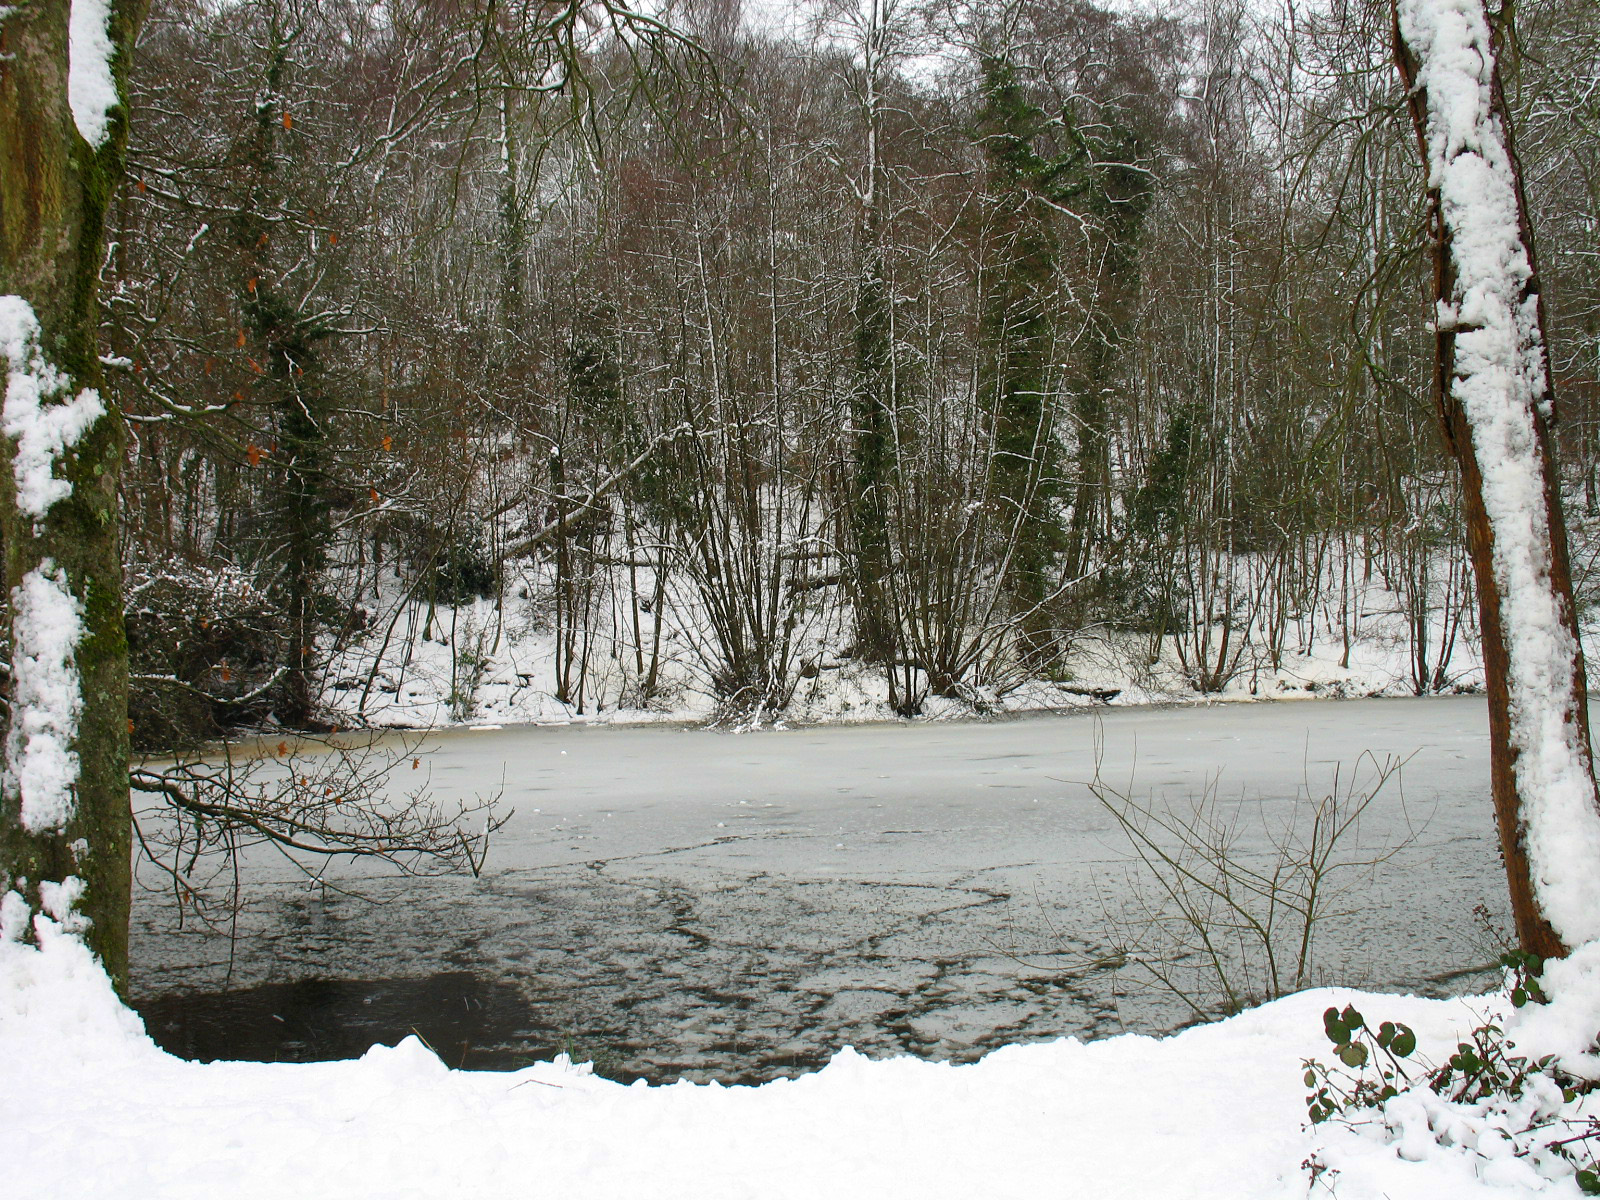 Winter at the Pond of the C.S. Lewis Nature Reserve